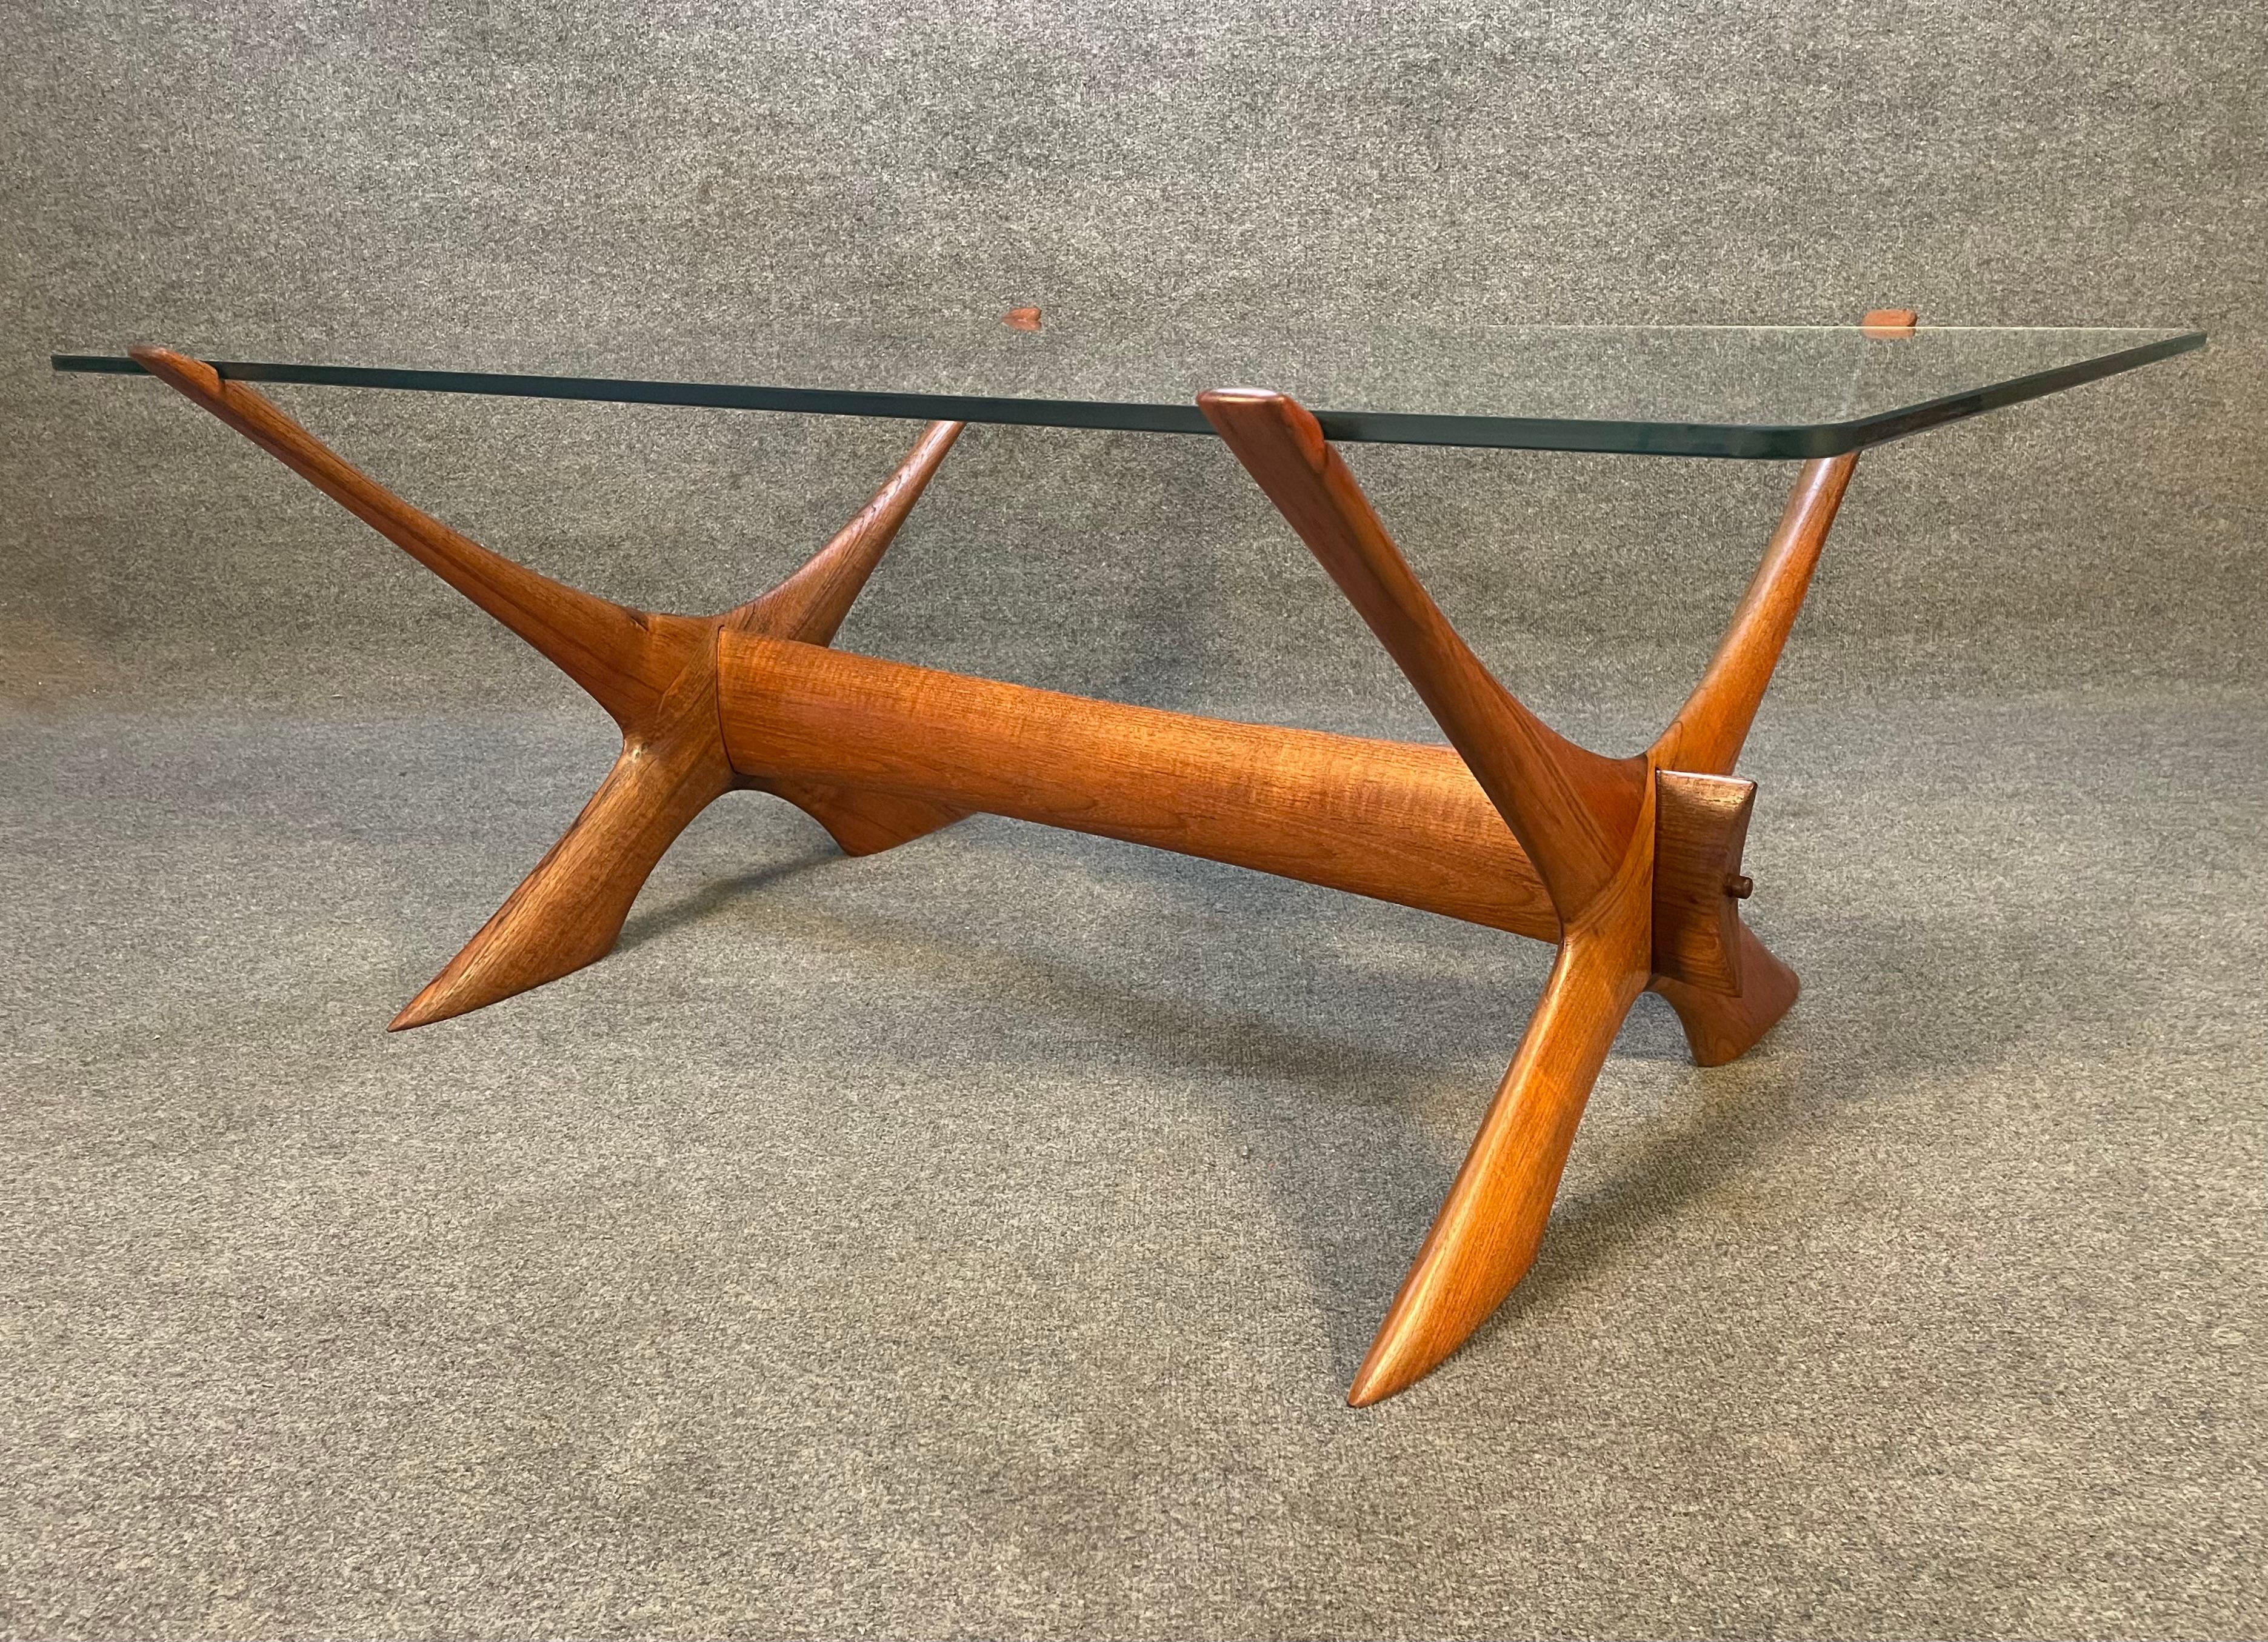 Here is a beautiful scandinavian modern coffee table in teak designed by Fredrik Schriever-Abeln and manufactured by Örebro Glas in Sweden in the 1960's.
This exquisite table, recently imported from Europe to California before its refinishing,